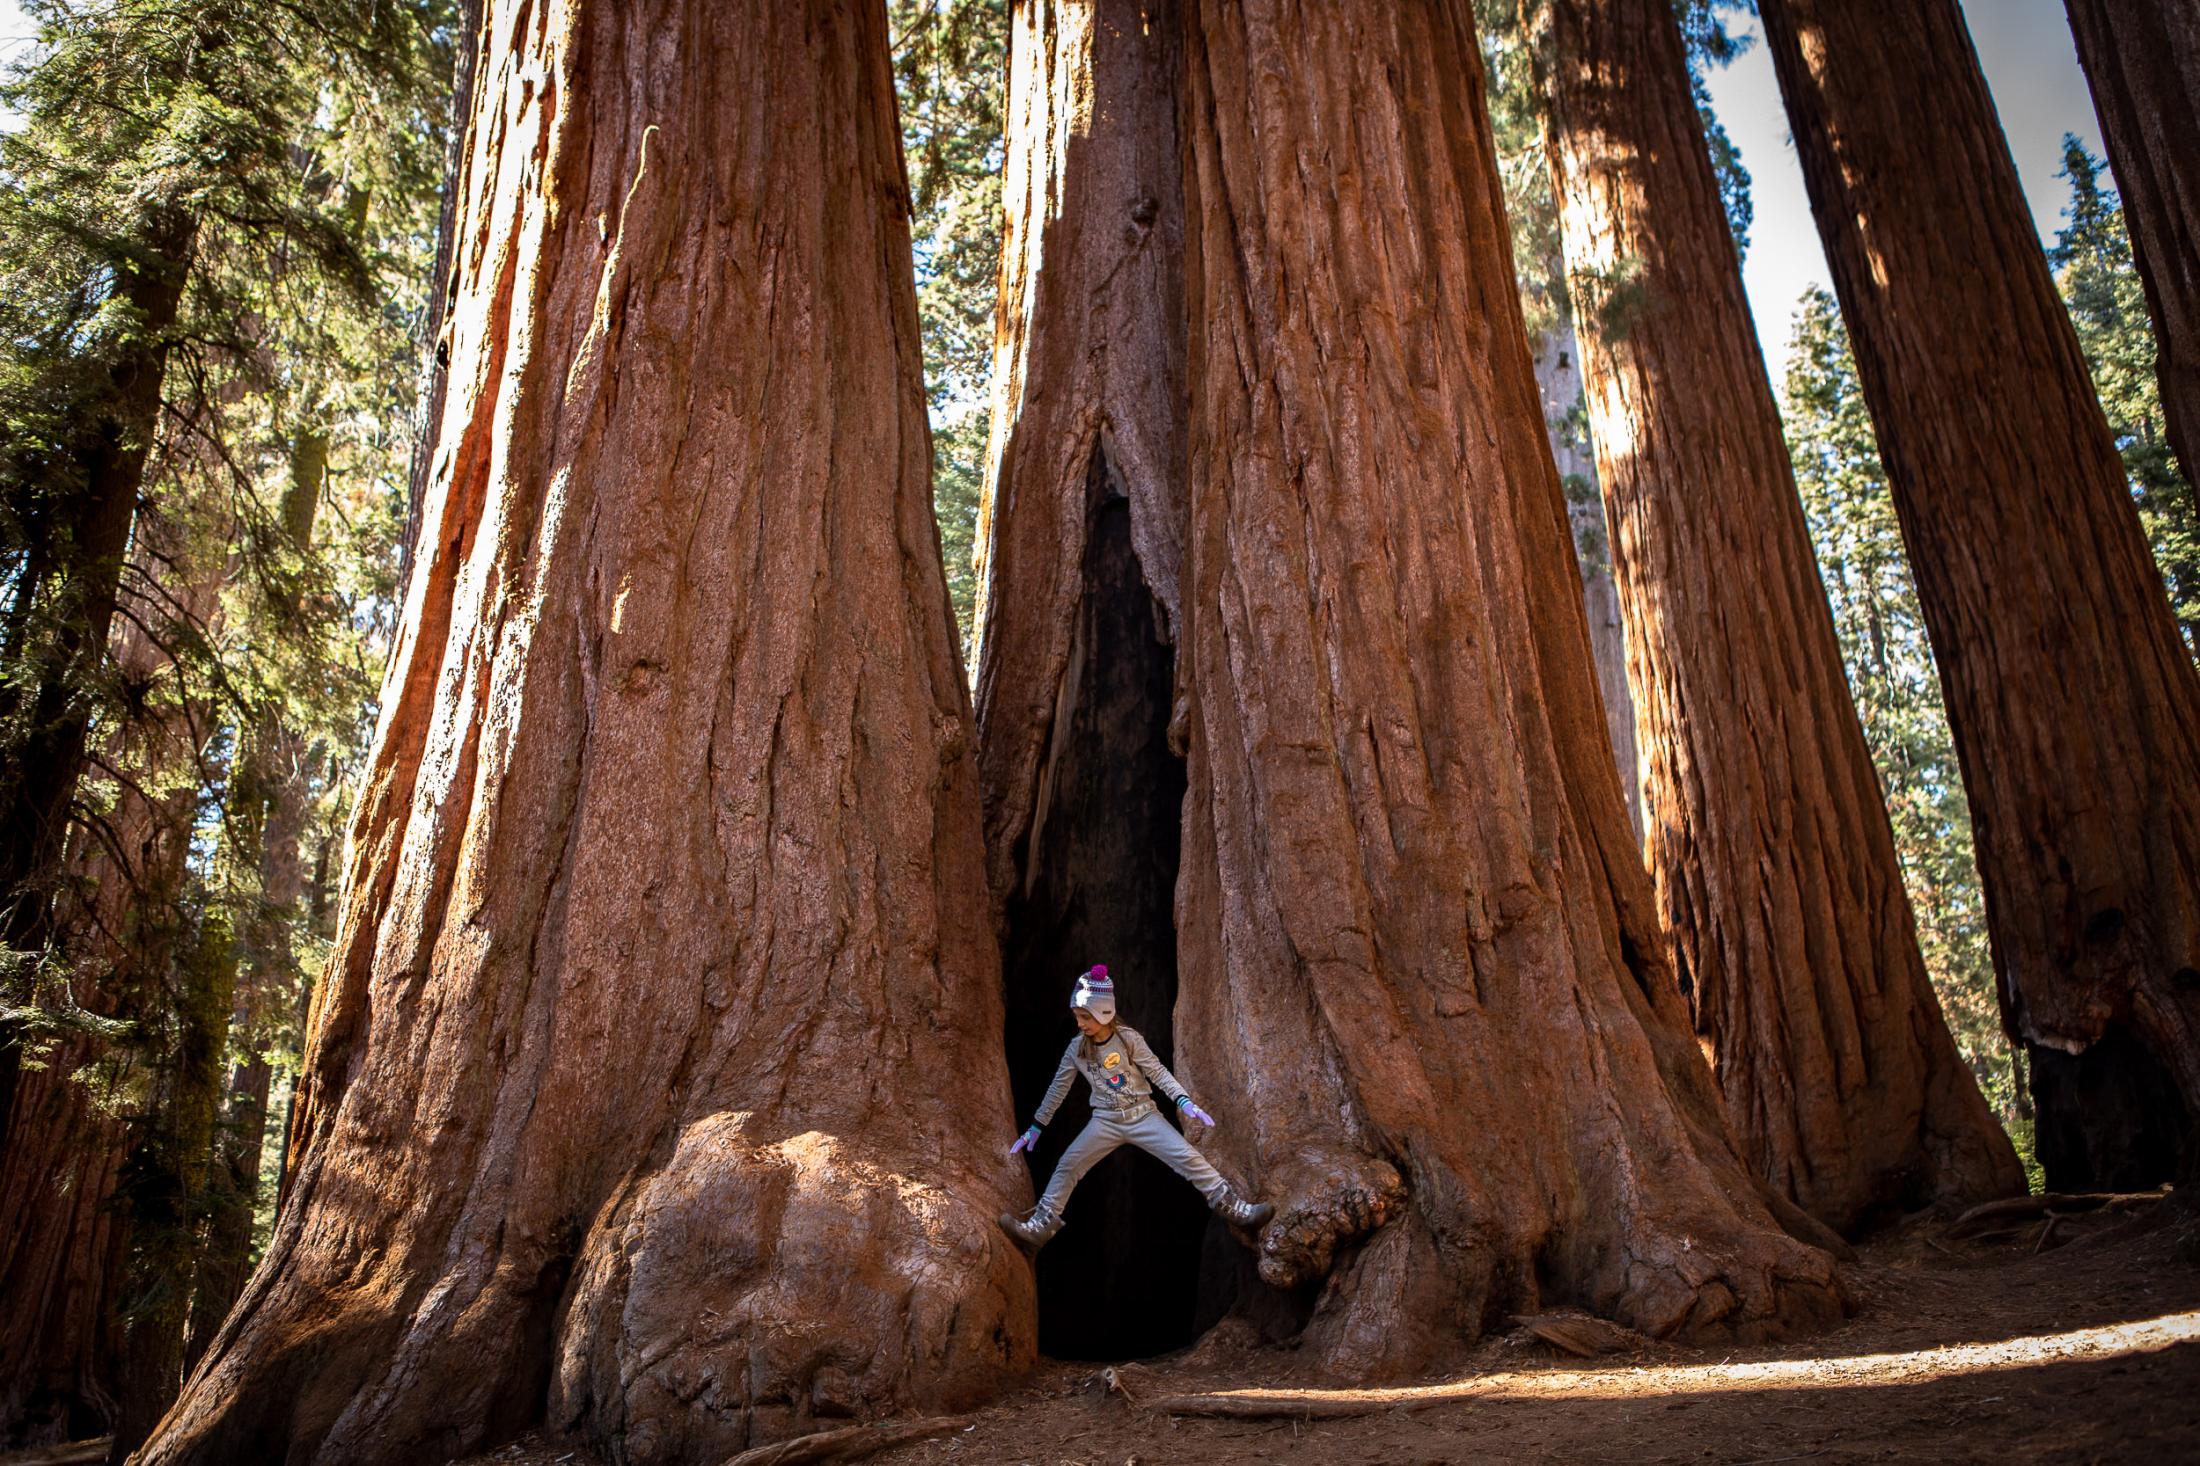  - Sequoias  -  A girl plays in the gap between a tree that has split....